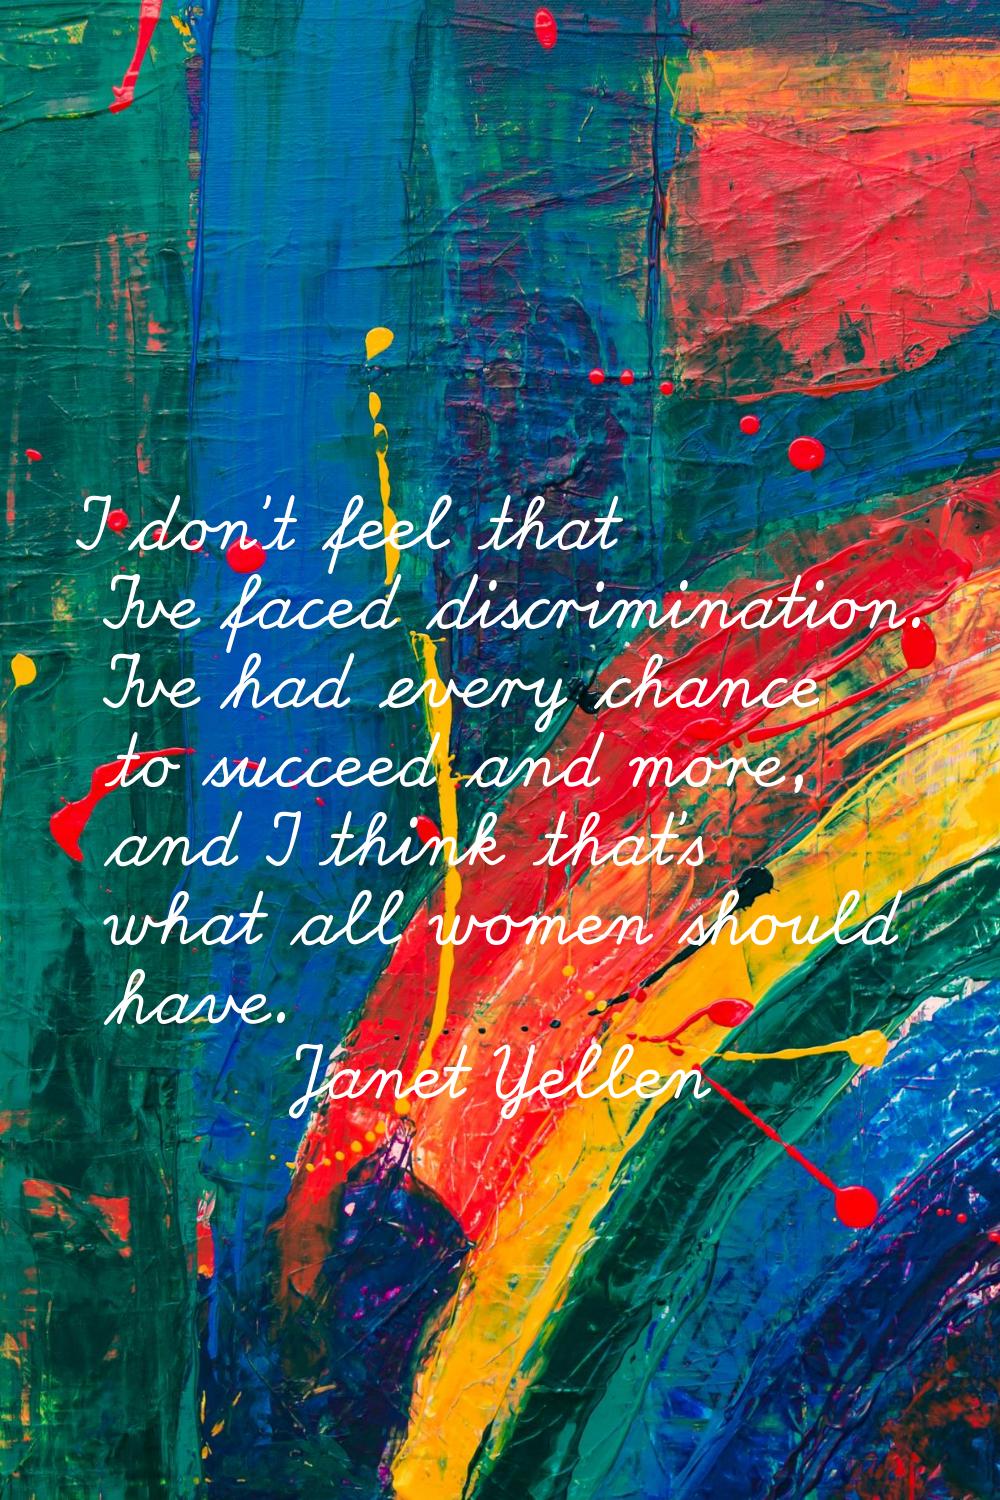 I don't feel that I've faced discrimination. I've had every chance to succeed and more, and I think